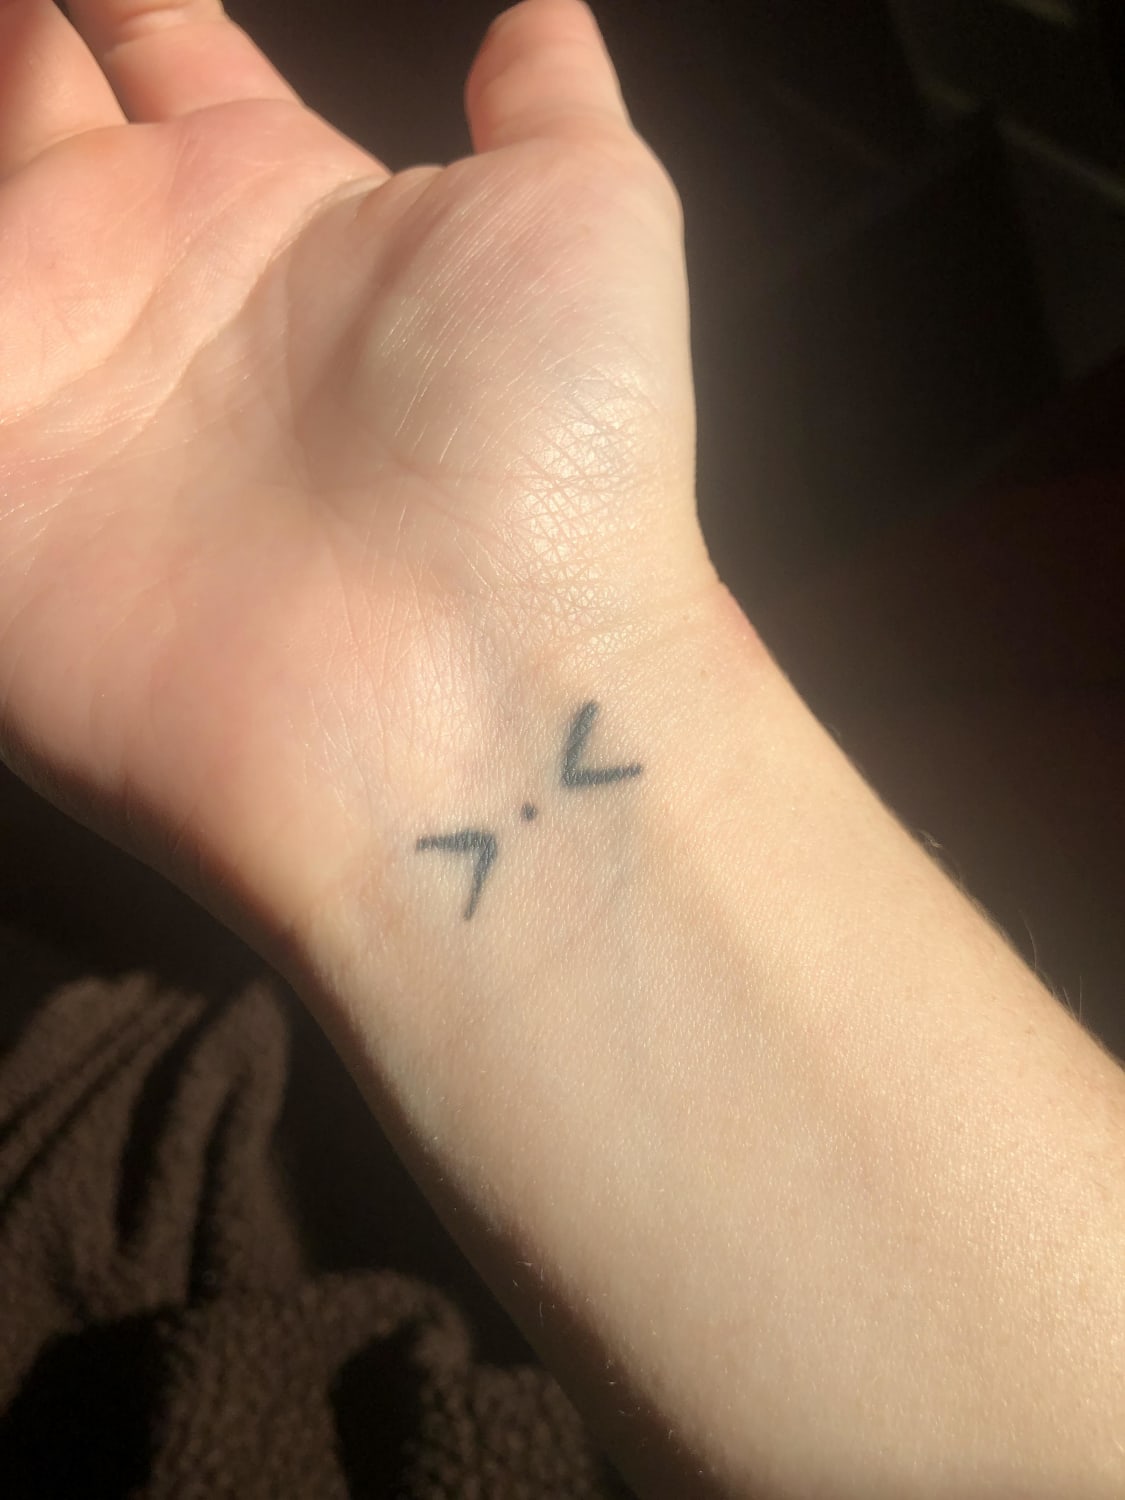 Saw a couple posts about mindfulness anchors- I’ve never heard them referred to like that before! Here’s mine :) the first and last symbols represent the past being behind me and the future in front. I’m the dot in the Here and Now.